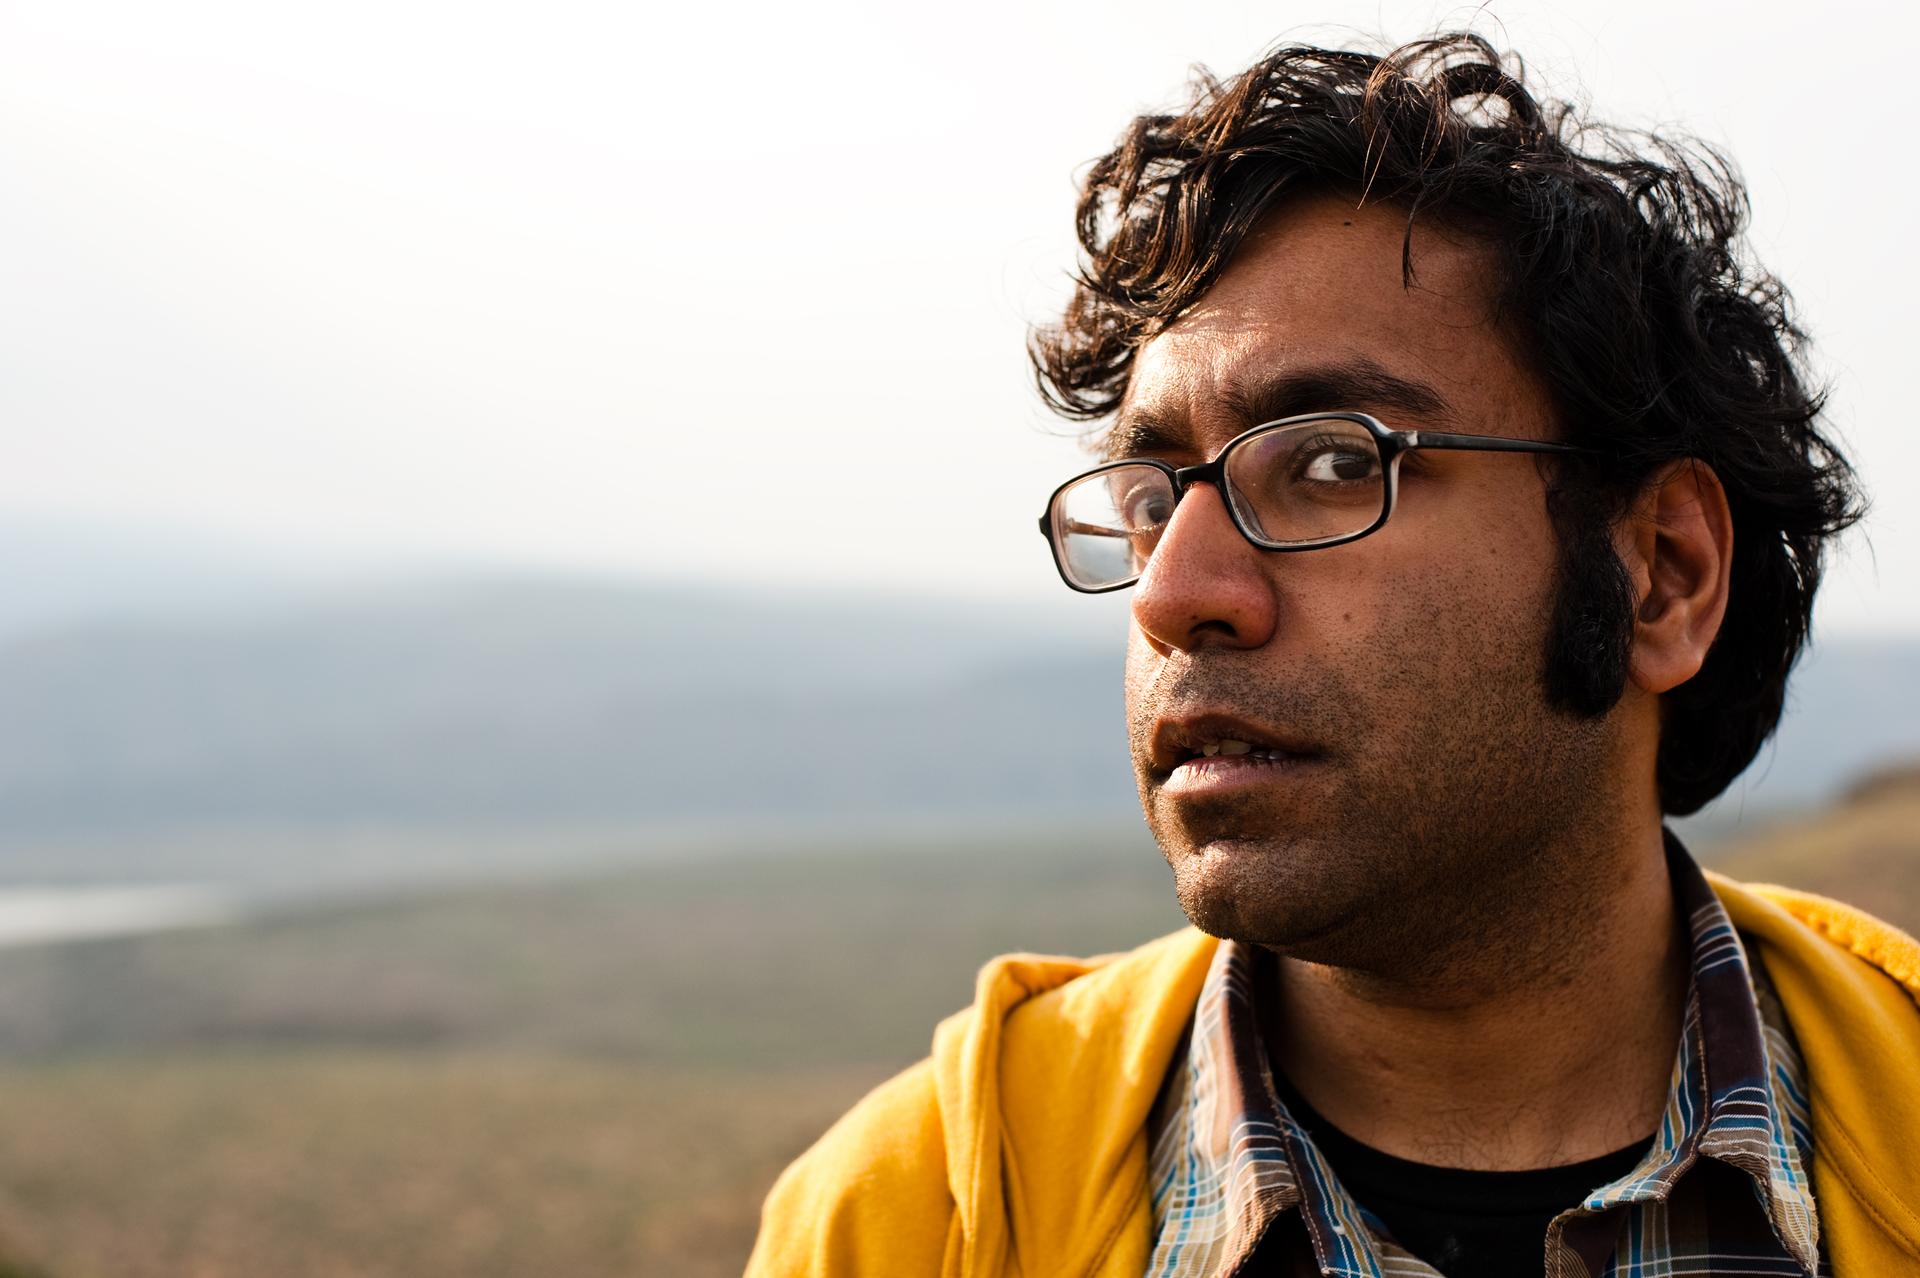 Comedian Hari Kondabolu grabs audiences with sketches on race, identity and politics.